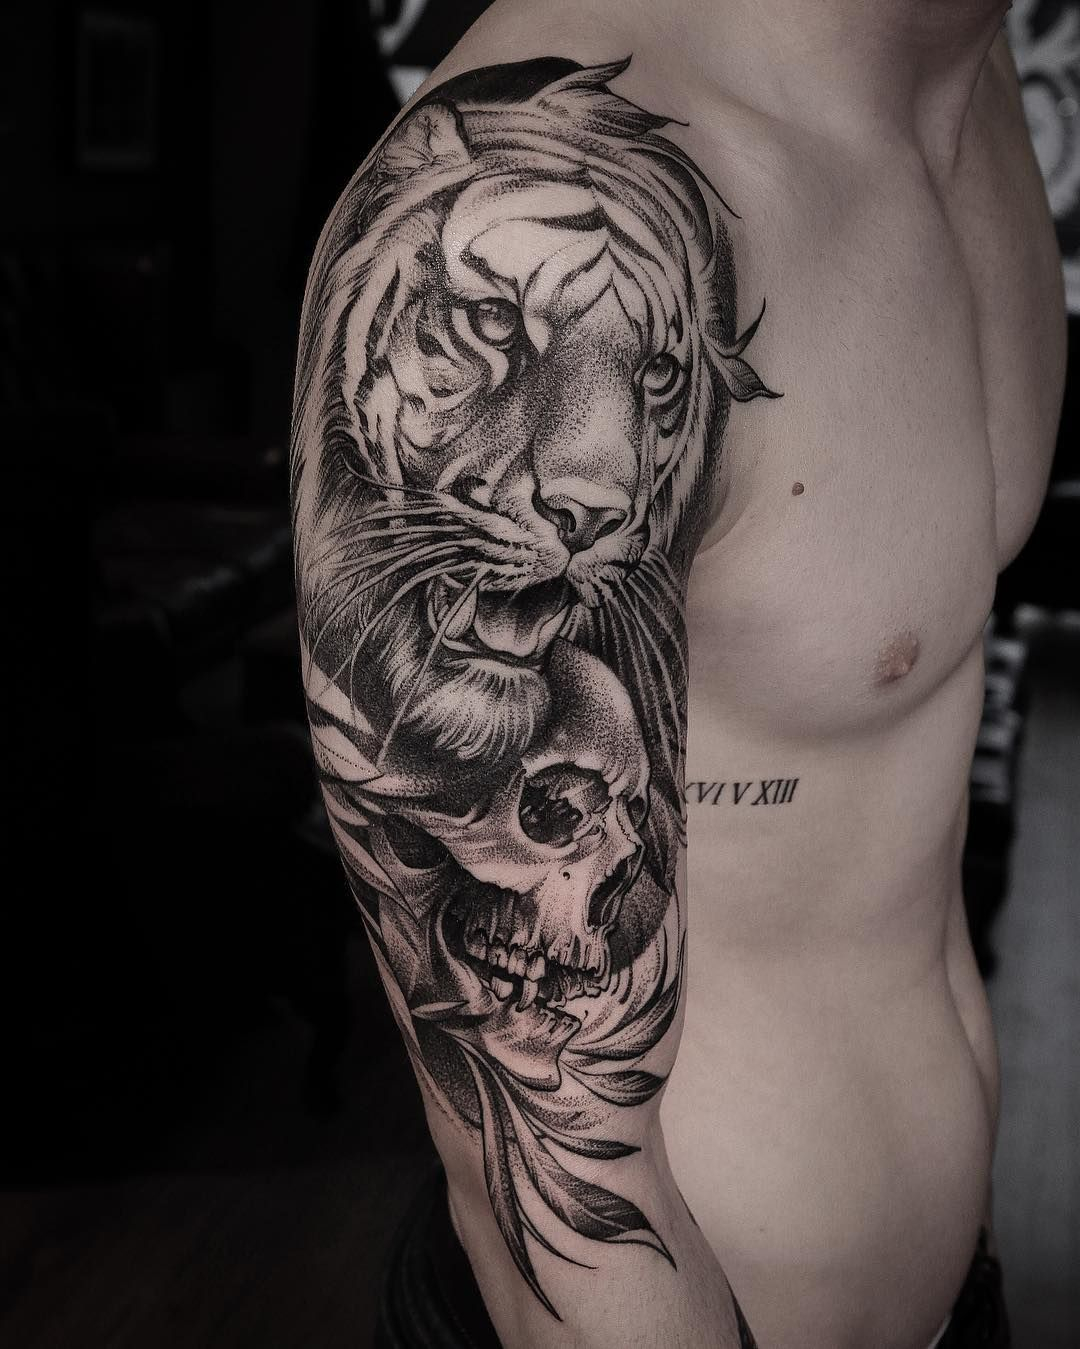 Tiger Tattoos Meaning And Design Ideas Tiger Tattoo Ideas inside dimensions 1080 X 1349